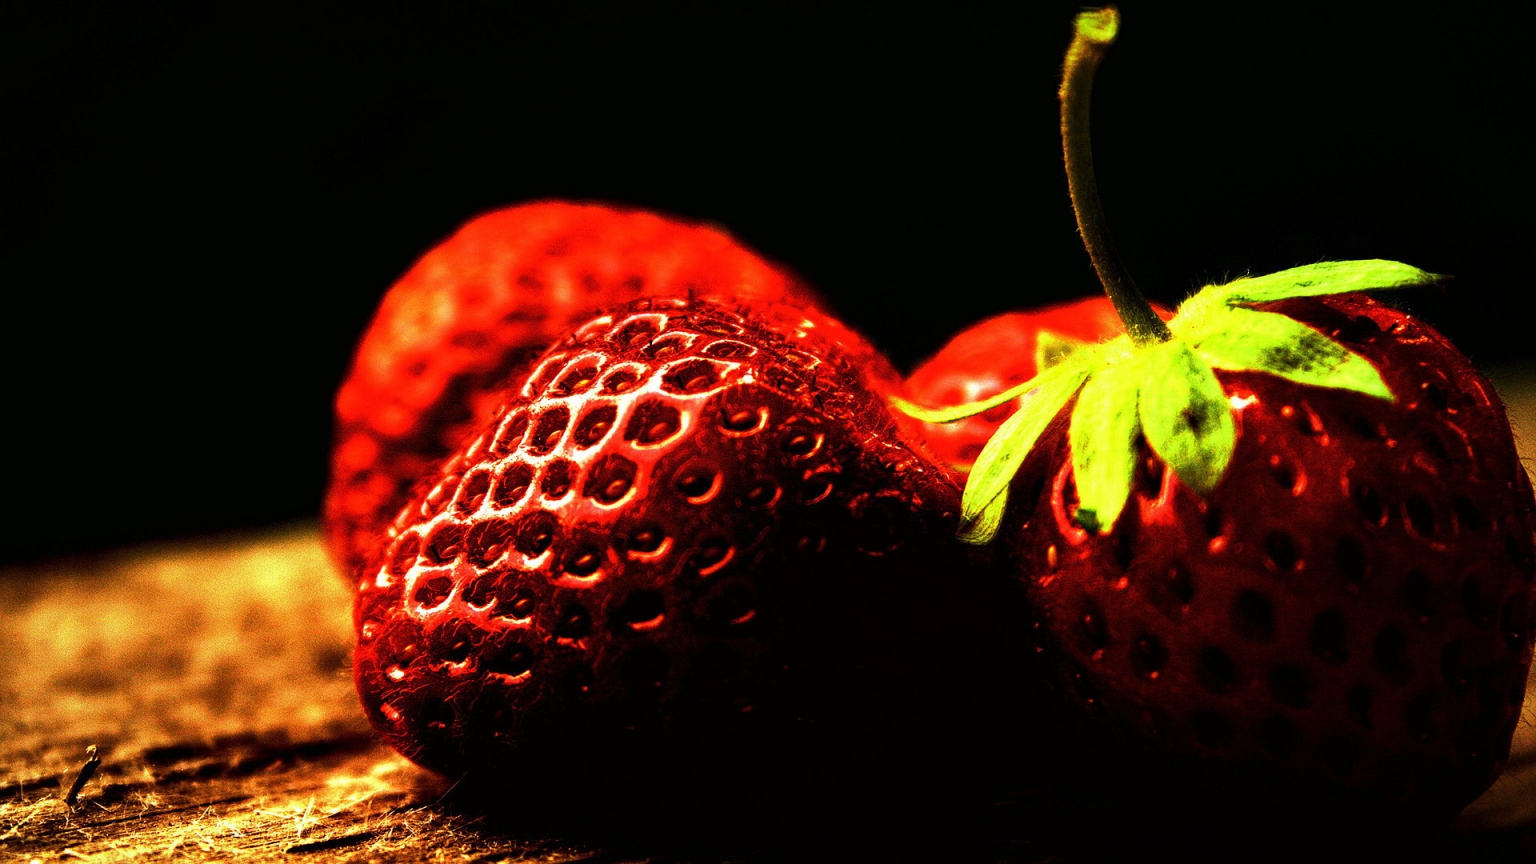 Two ripe strawberries for 1536 x 864 HDTV resolution